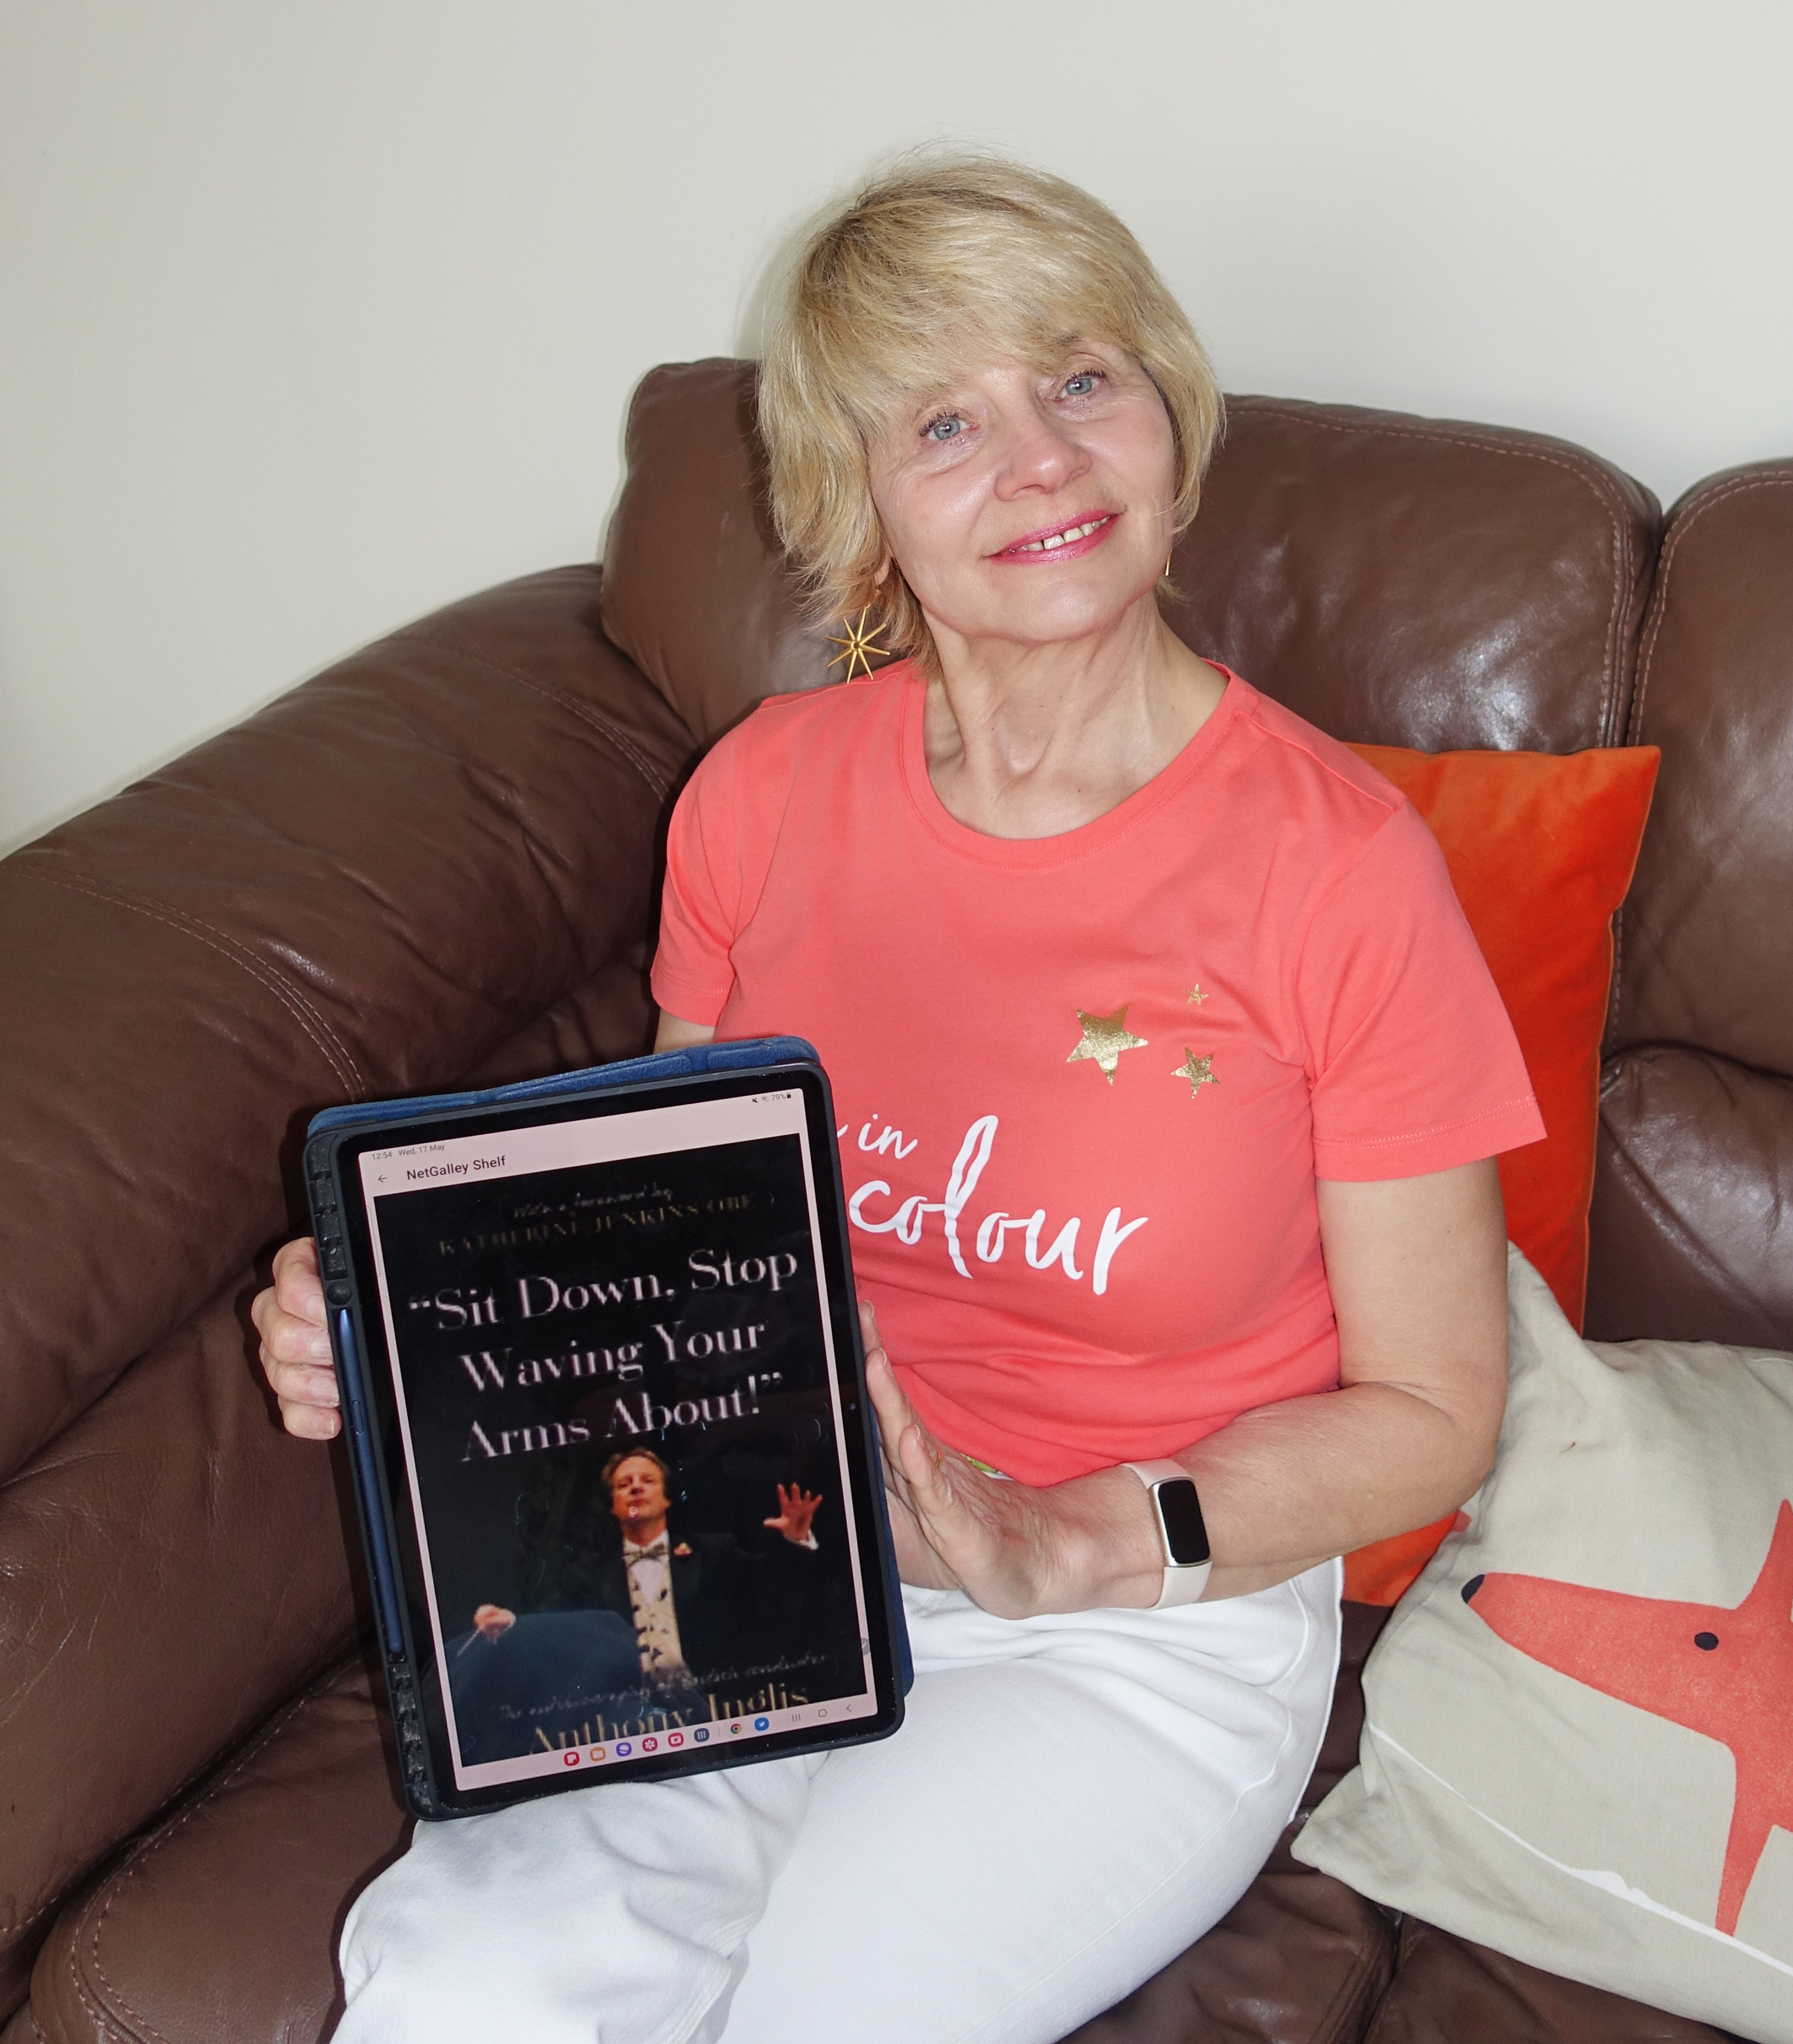 Book, fashion and beauty blogger Gail Hanlon from Is This Mutton reads a book on her tablet